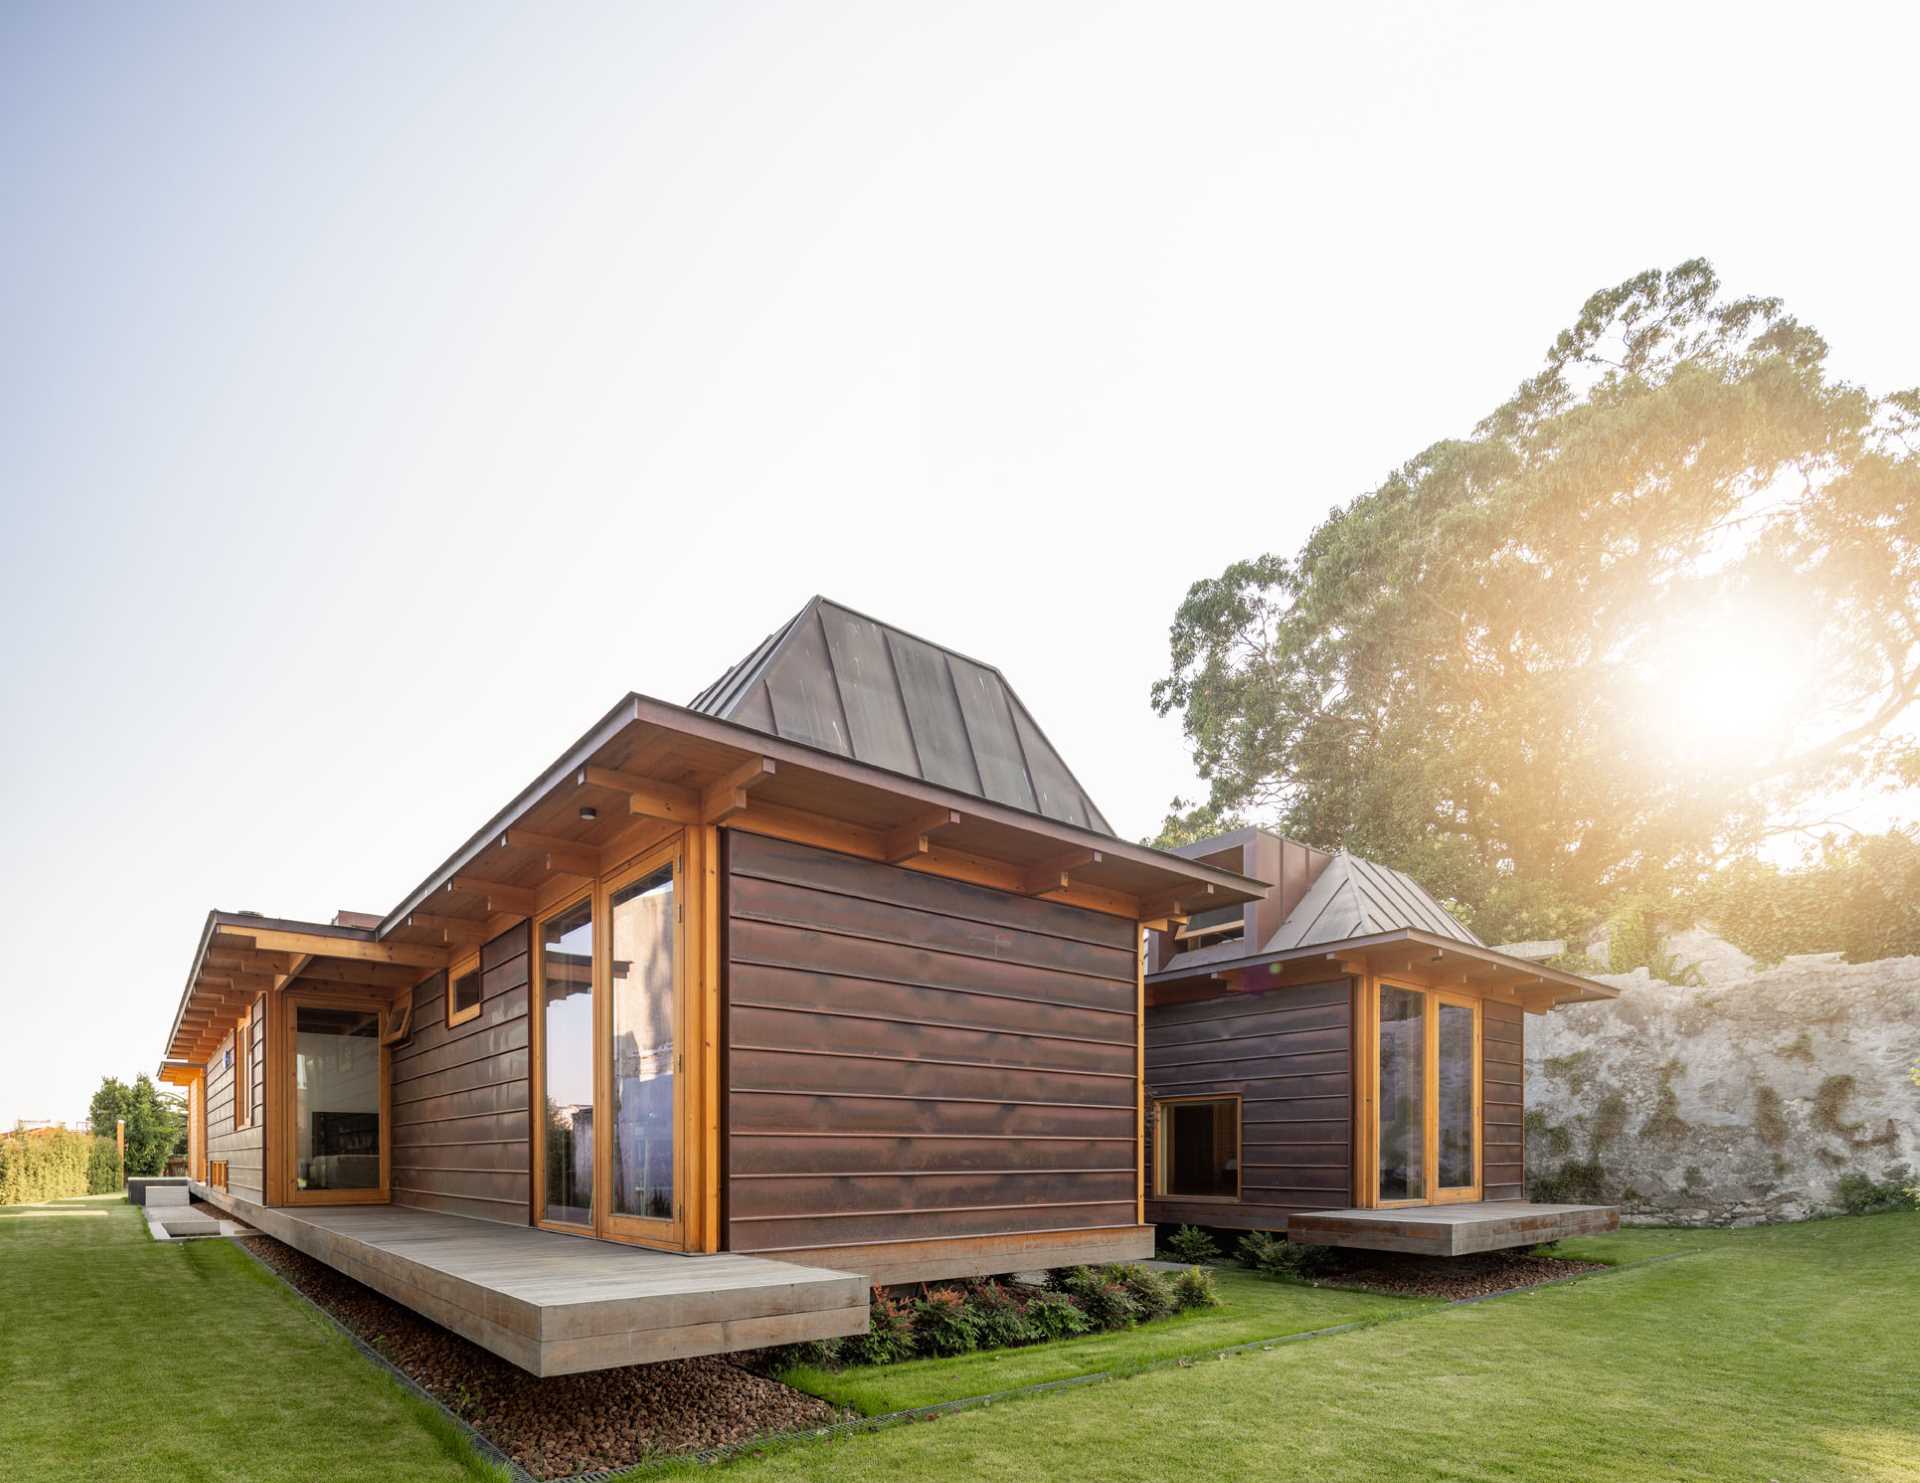 A modern house with copper-clad roof and copper siding, and wood framing.